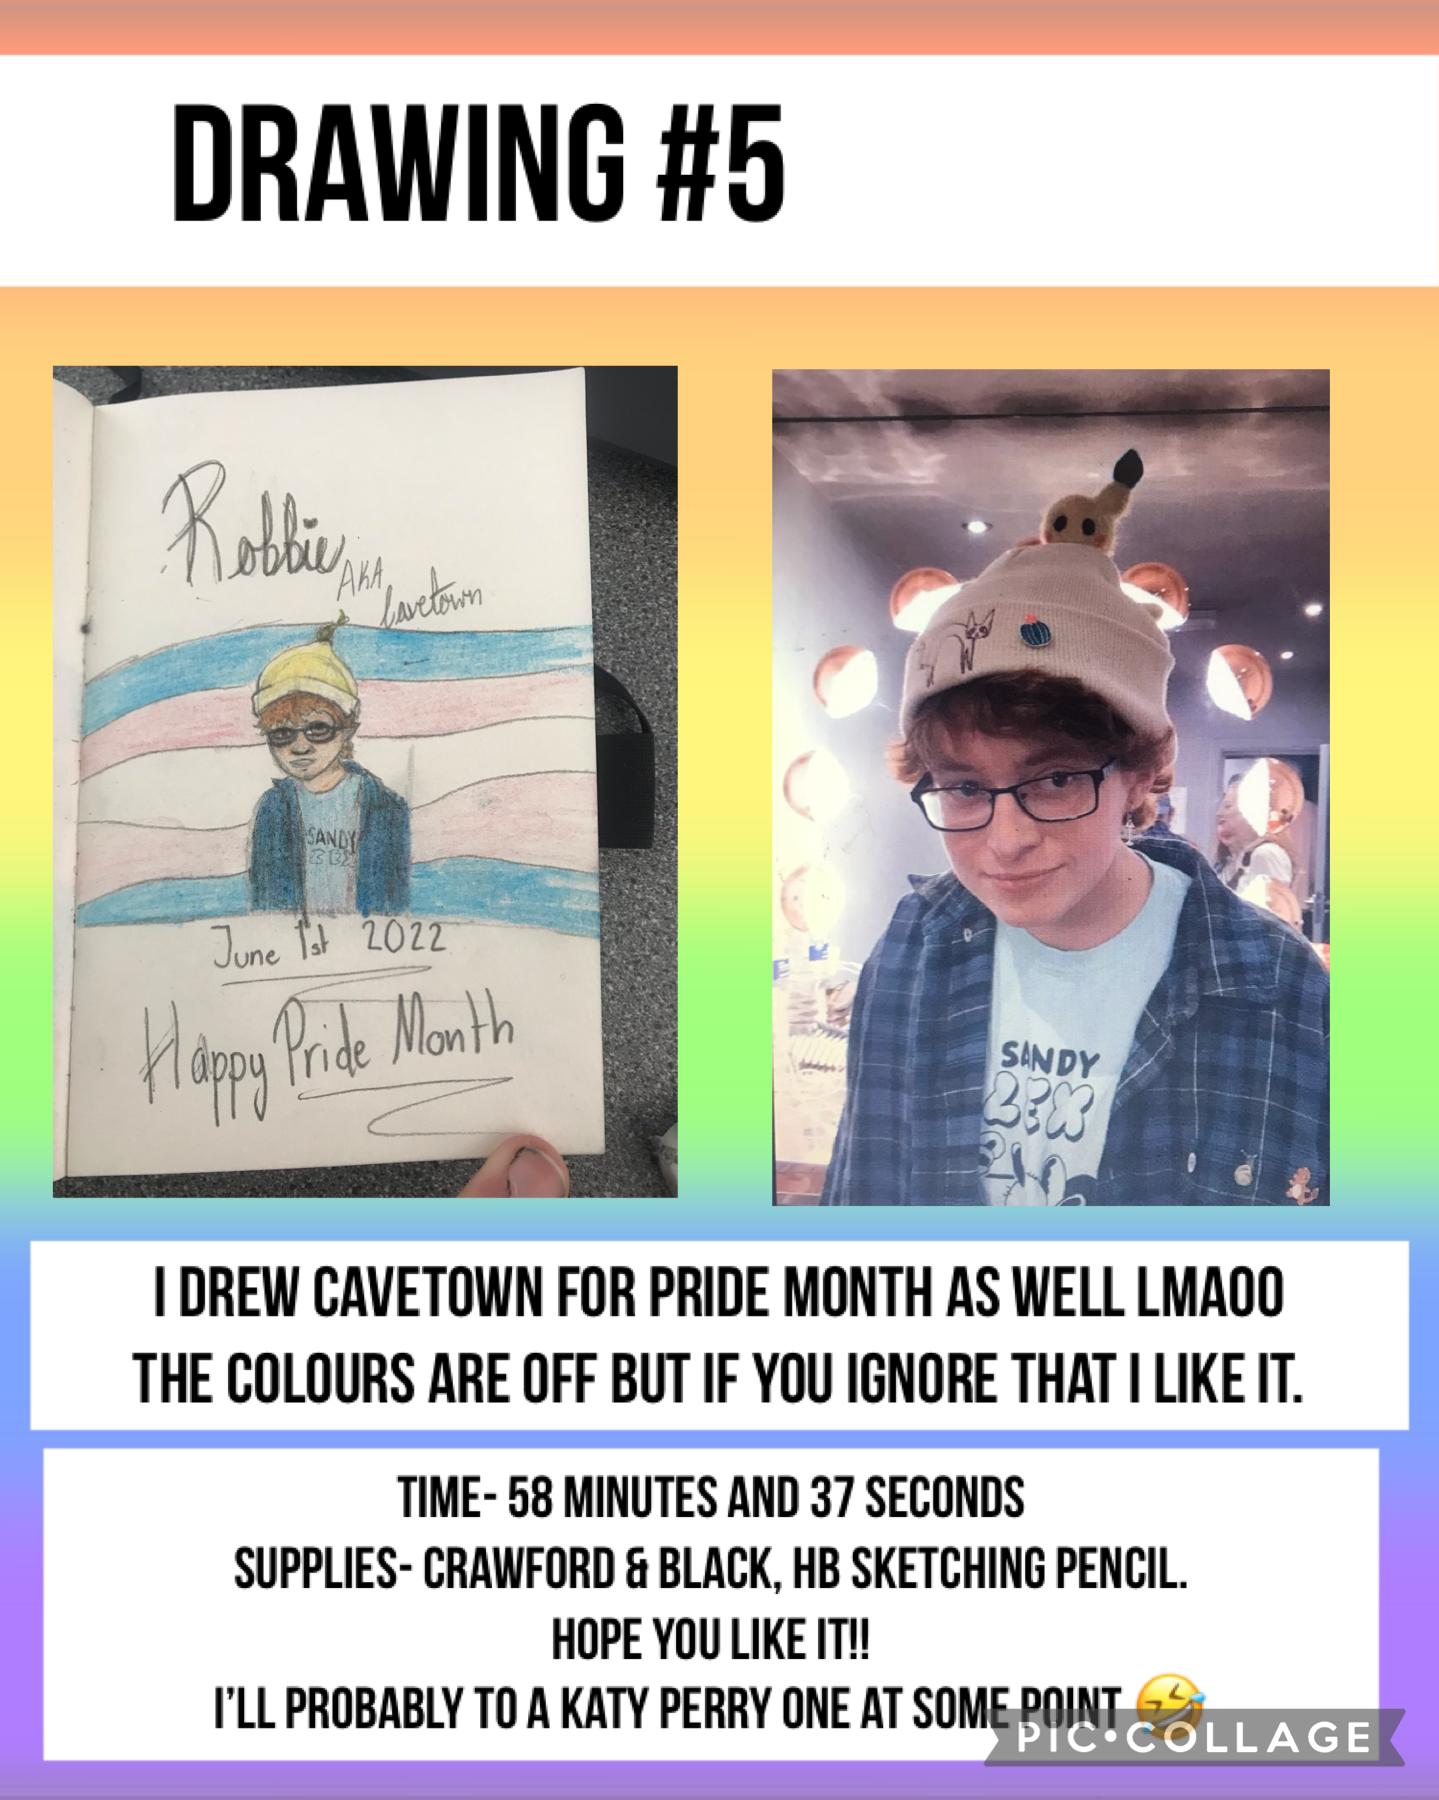 TAPPP
Hehe i did say i was gonna do a cavetown one from PrIdE mOnTh!!